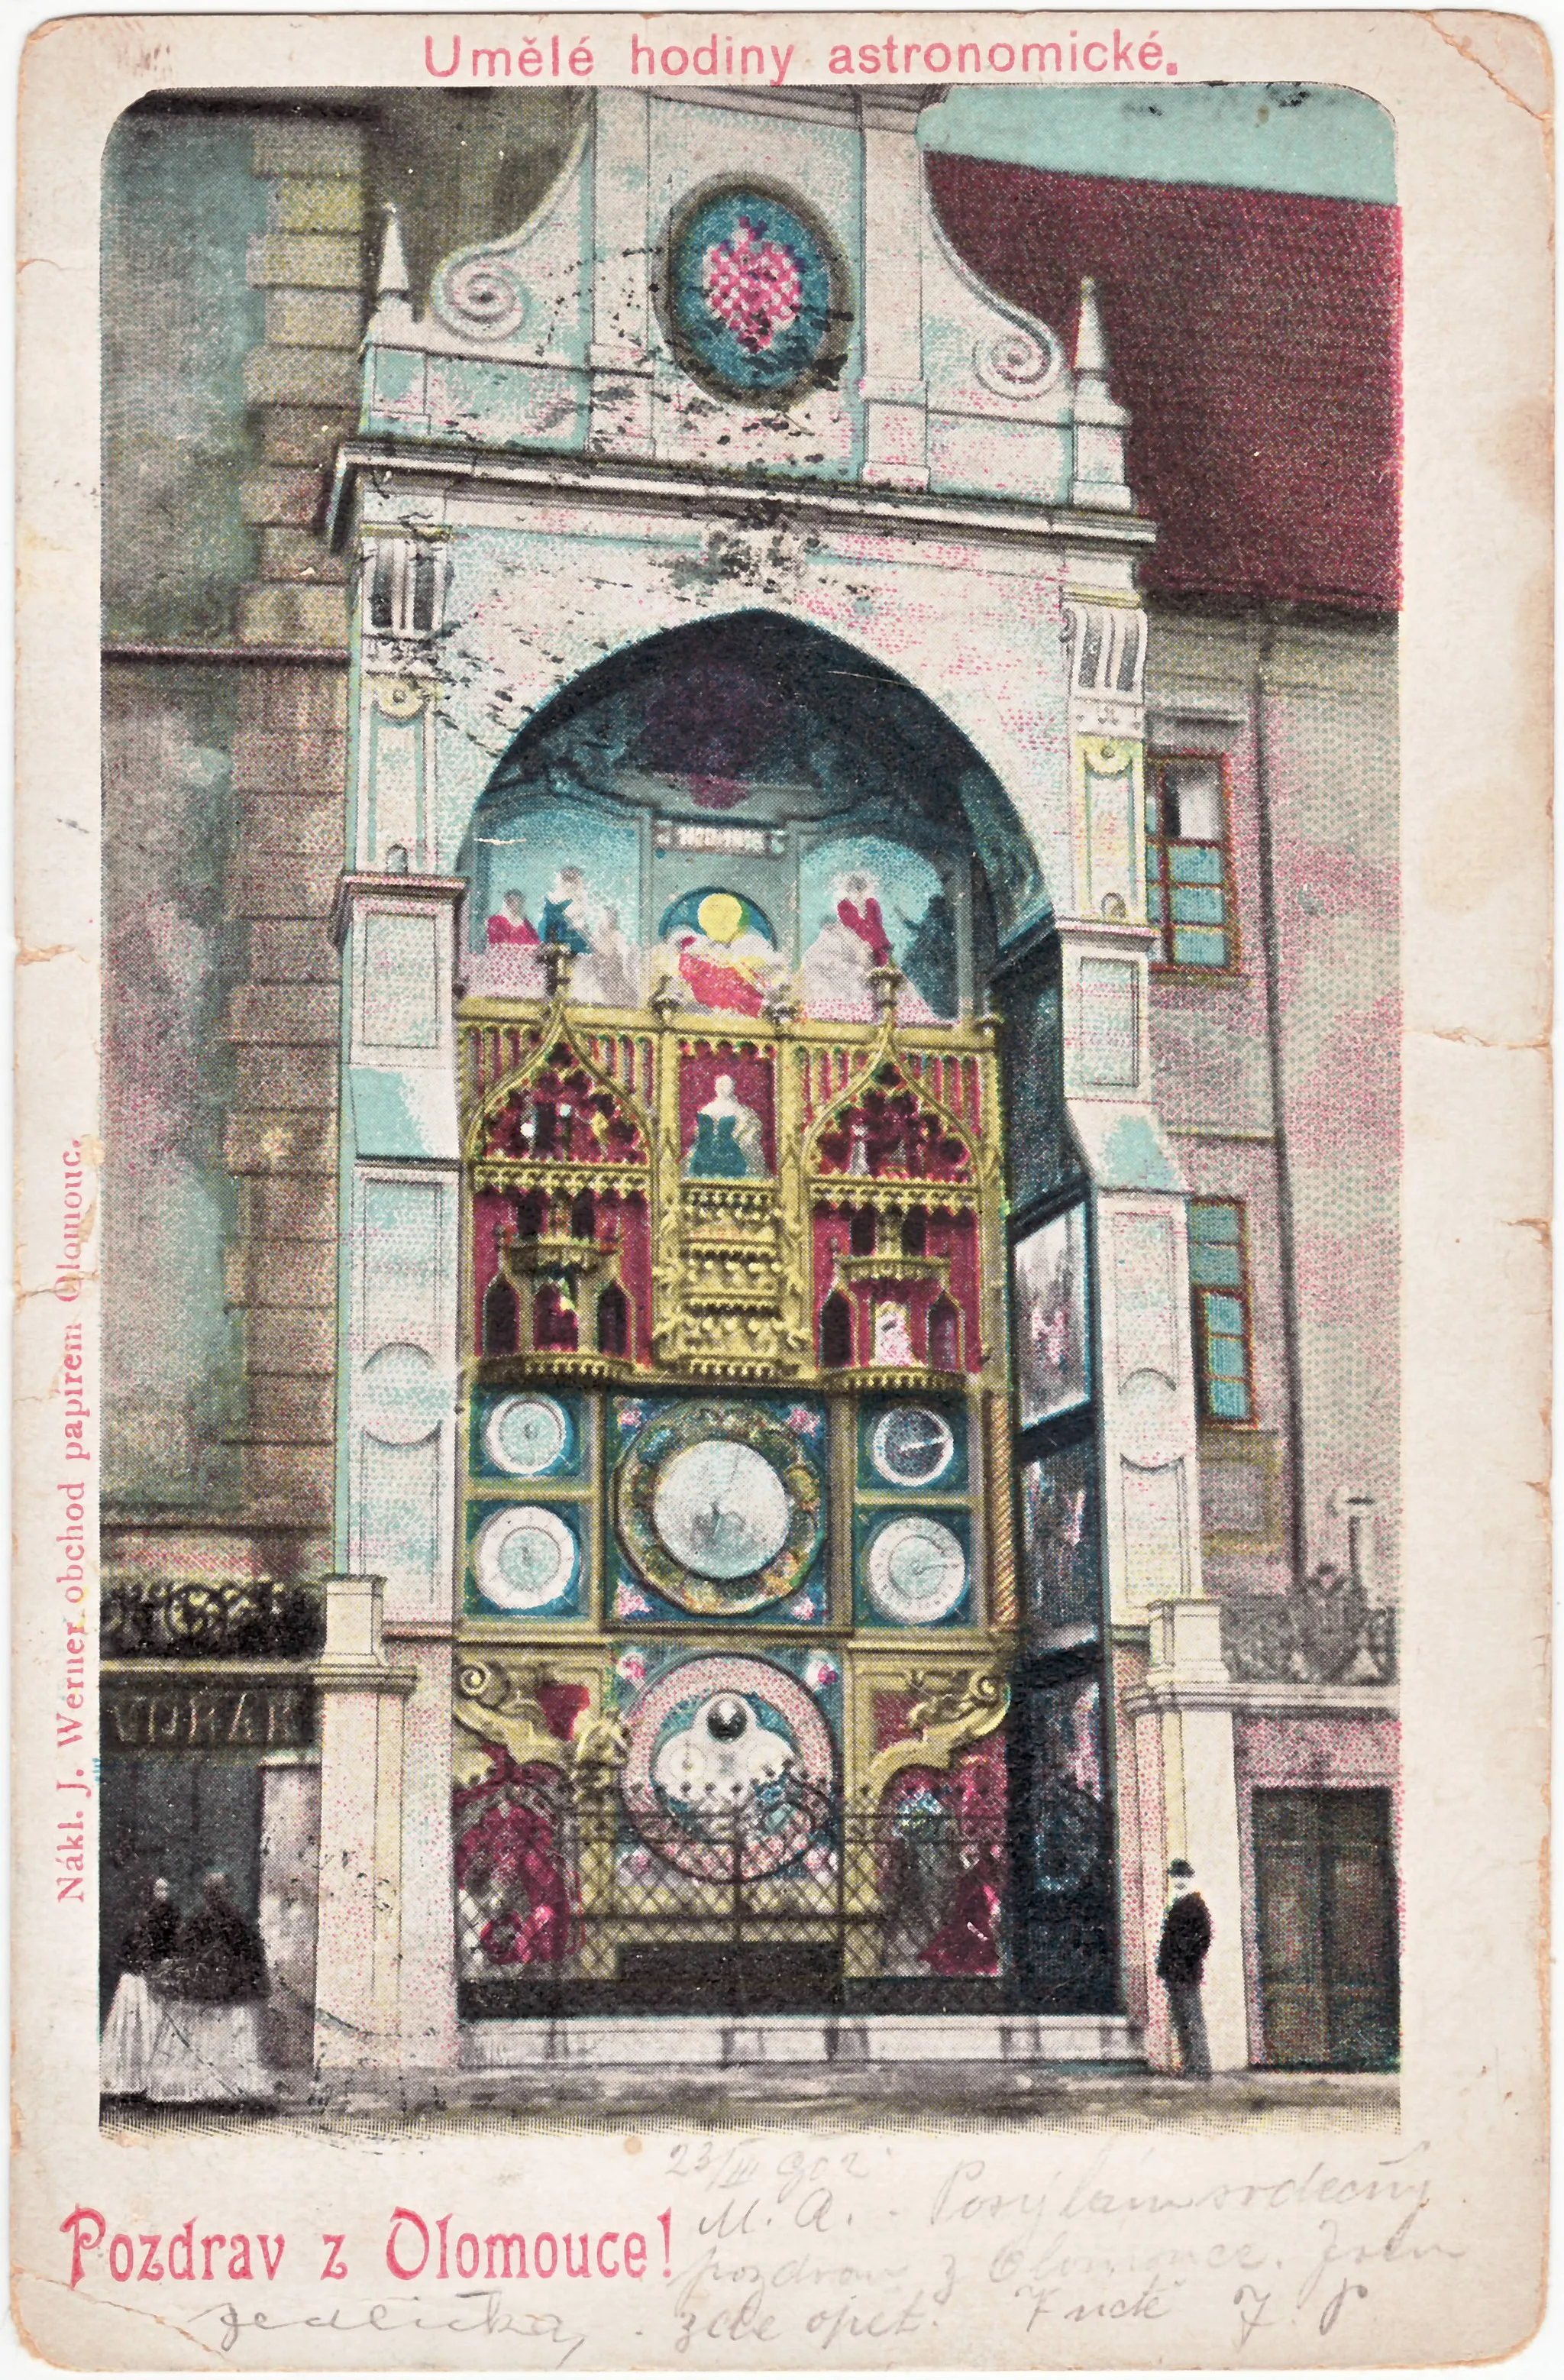 Photo showing: Historical postcard with the astronomical clock in Olomouc as it looked after the renovation in 1898. The postcard was postmarked on 23 March 1902.